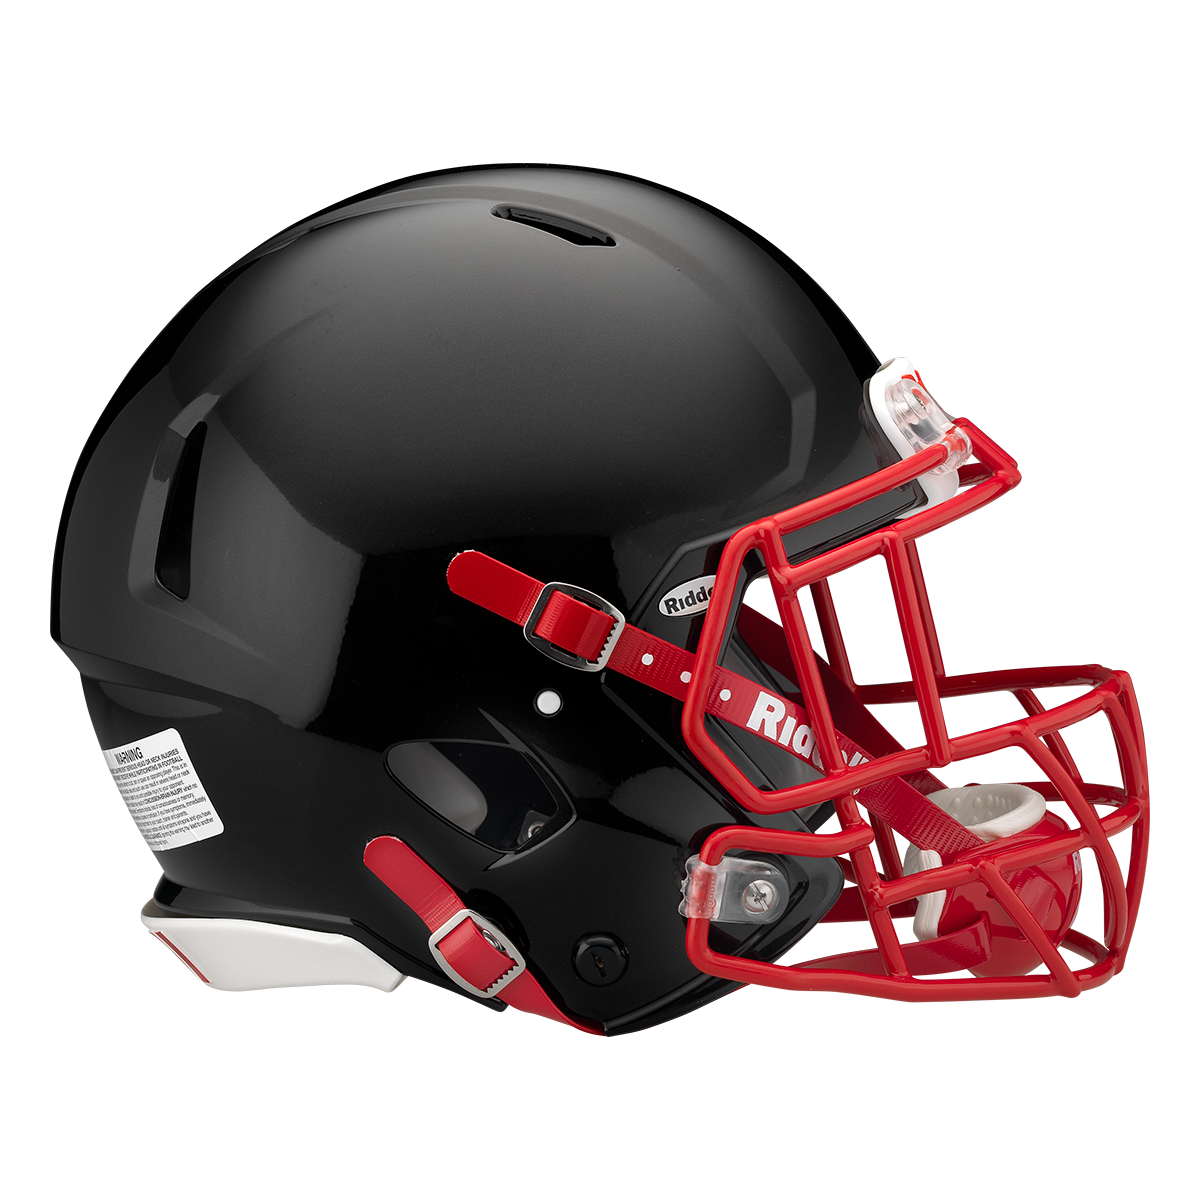 This member of the Speed Platform, is designed for Youth Players through Junior High.  HS4 Face Mask Quick Change Liner Attachment System Patented Side Impact Protection (PSIP) Classic Liner System Air Fit Liner Screw + T-Nut Face Mask Attachment Light Weight Technology ABS Shell This product is covered by at least one U.S. patent. See Riddell's patent page for more information.   WARNING: NO HELMET CAN PREVENT SERIOUS HEAD OR NECK INJURIES A PLAYER MIGHT RECEIVE WHILE PARTICIPATING IN FOOTBALL.